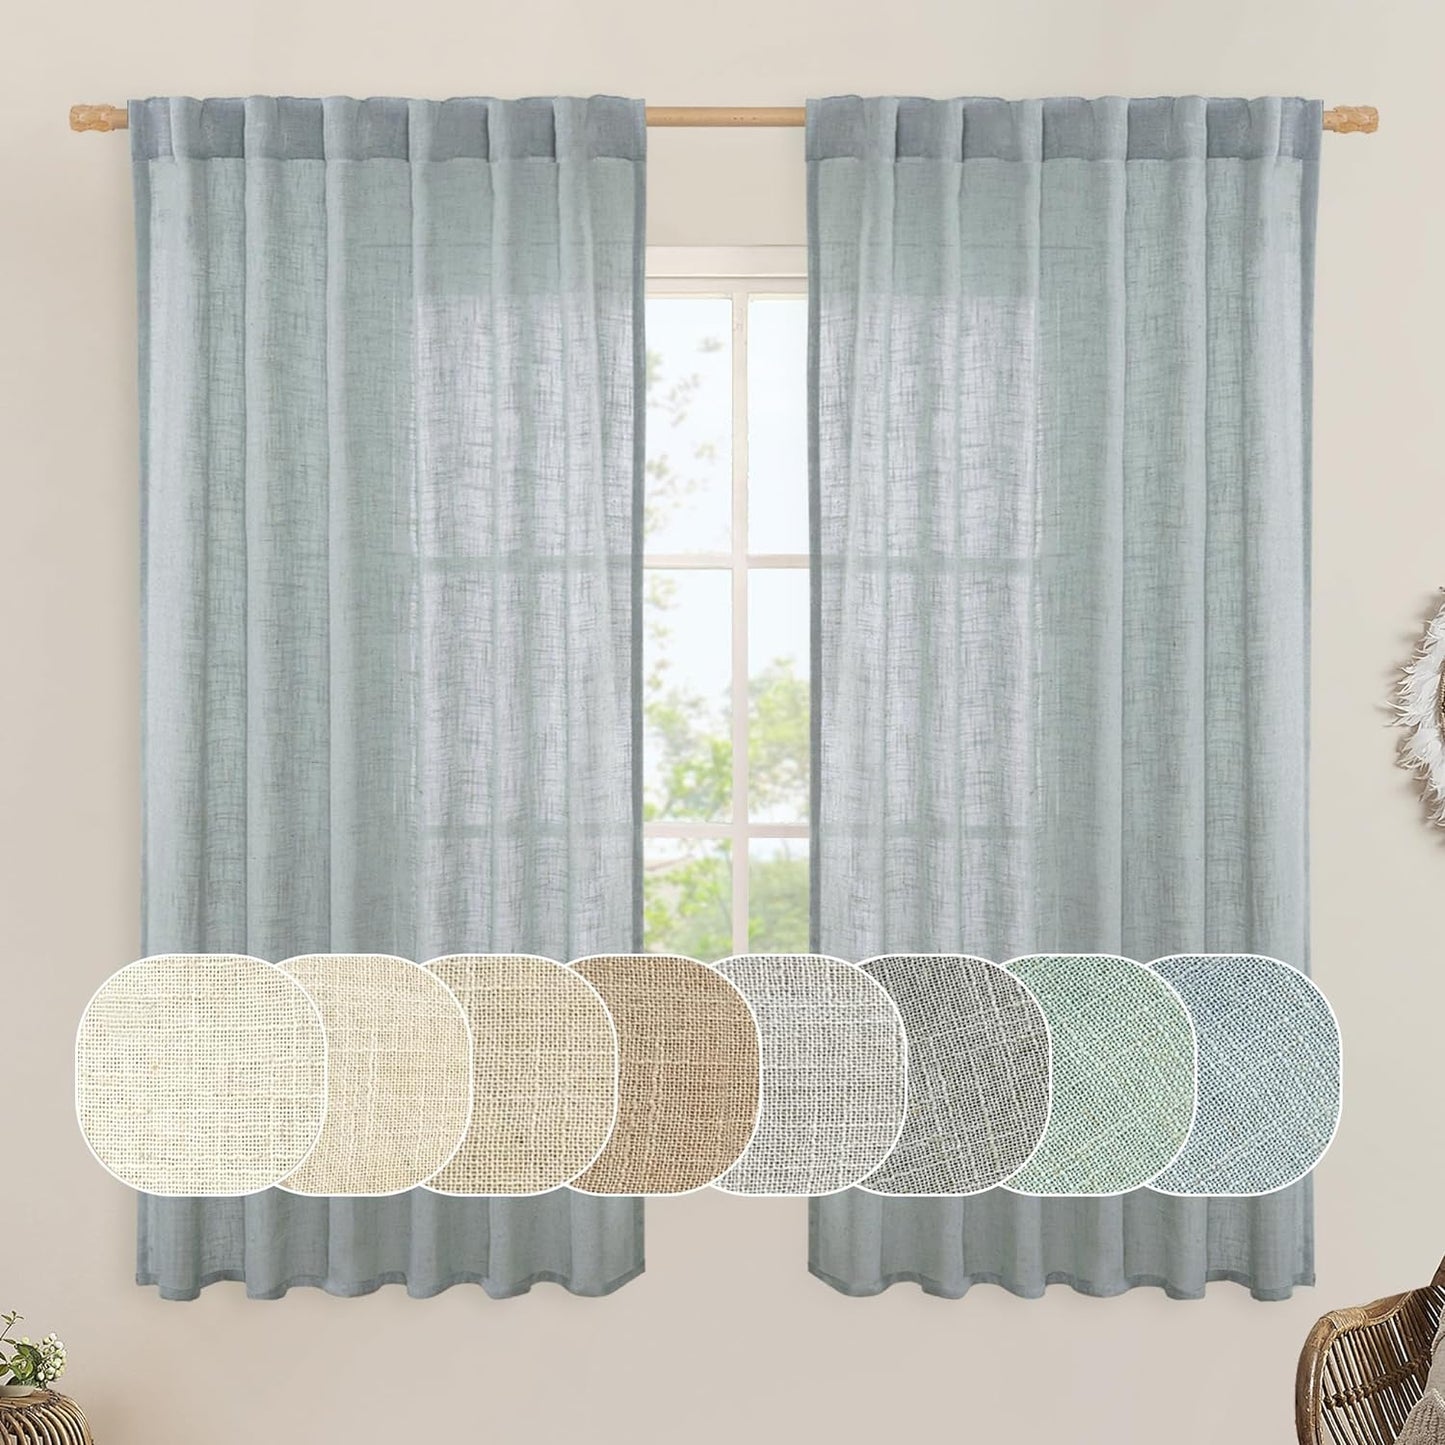 LAMIT Natural Linen Blended Curtains for Living Room, Back Tab and Rod Pocket Semi Sheer Curtains Light Filtering Country Rustic Drapes for Bedroom/Farmhouse, 2 Panels,52 X 108 Inch, Linen  LAMIT Greyish Blue 52W X 63L 